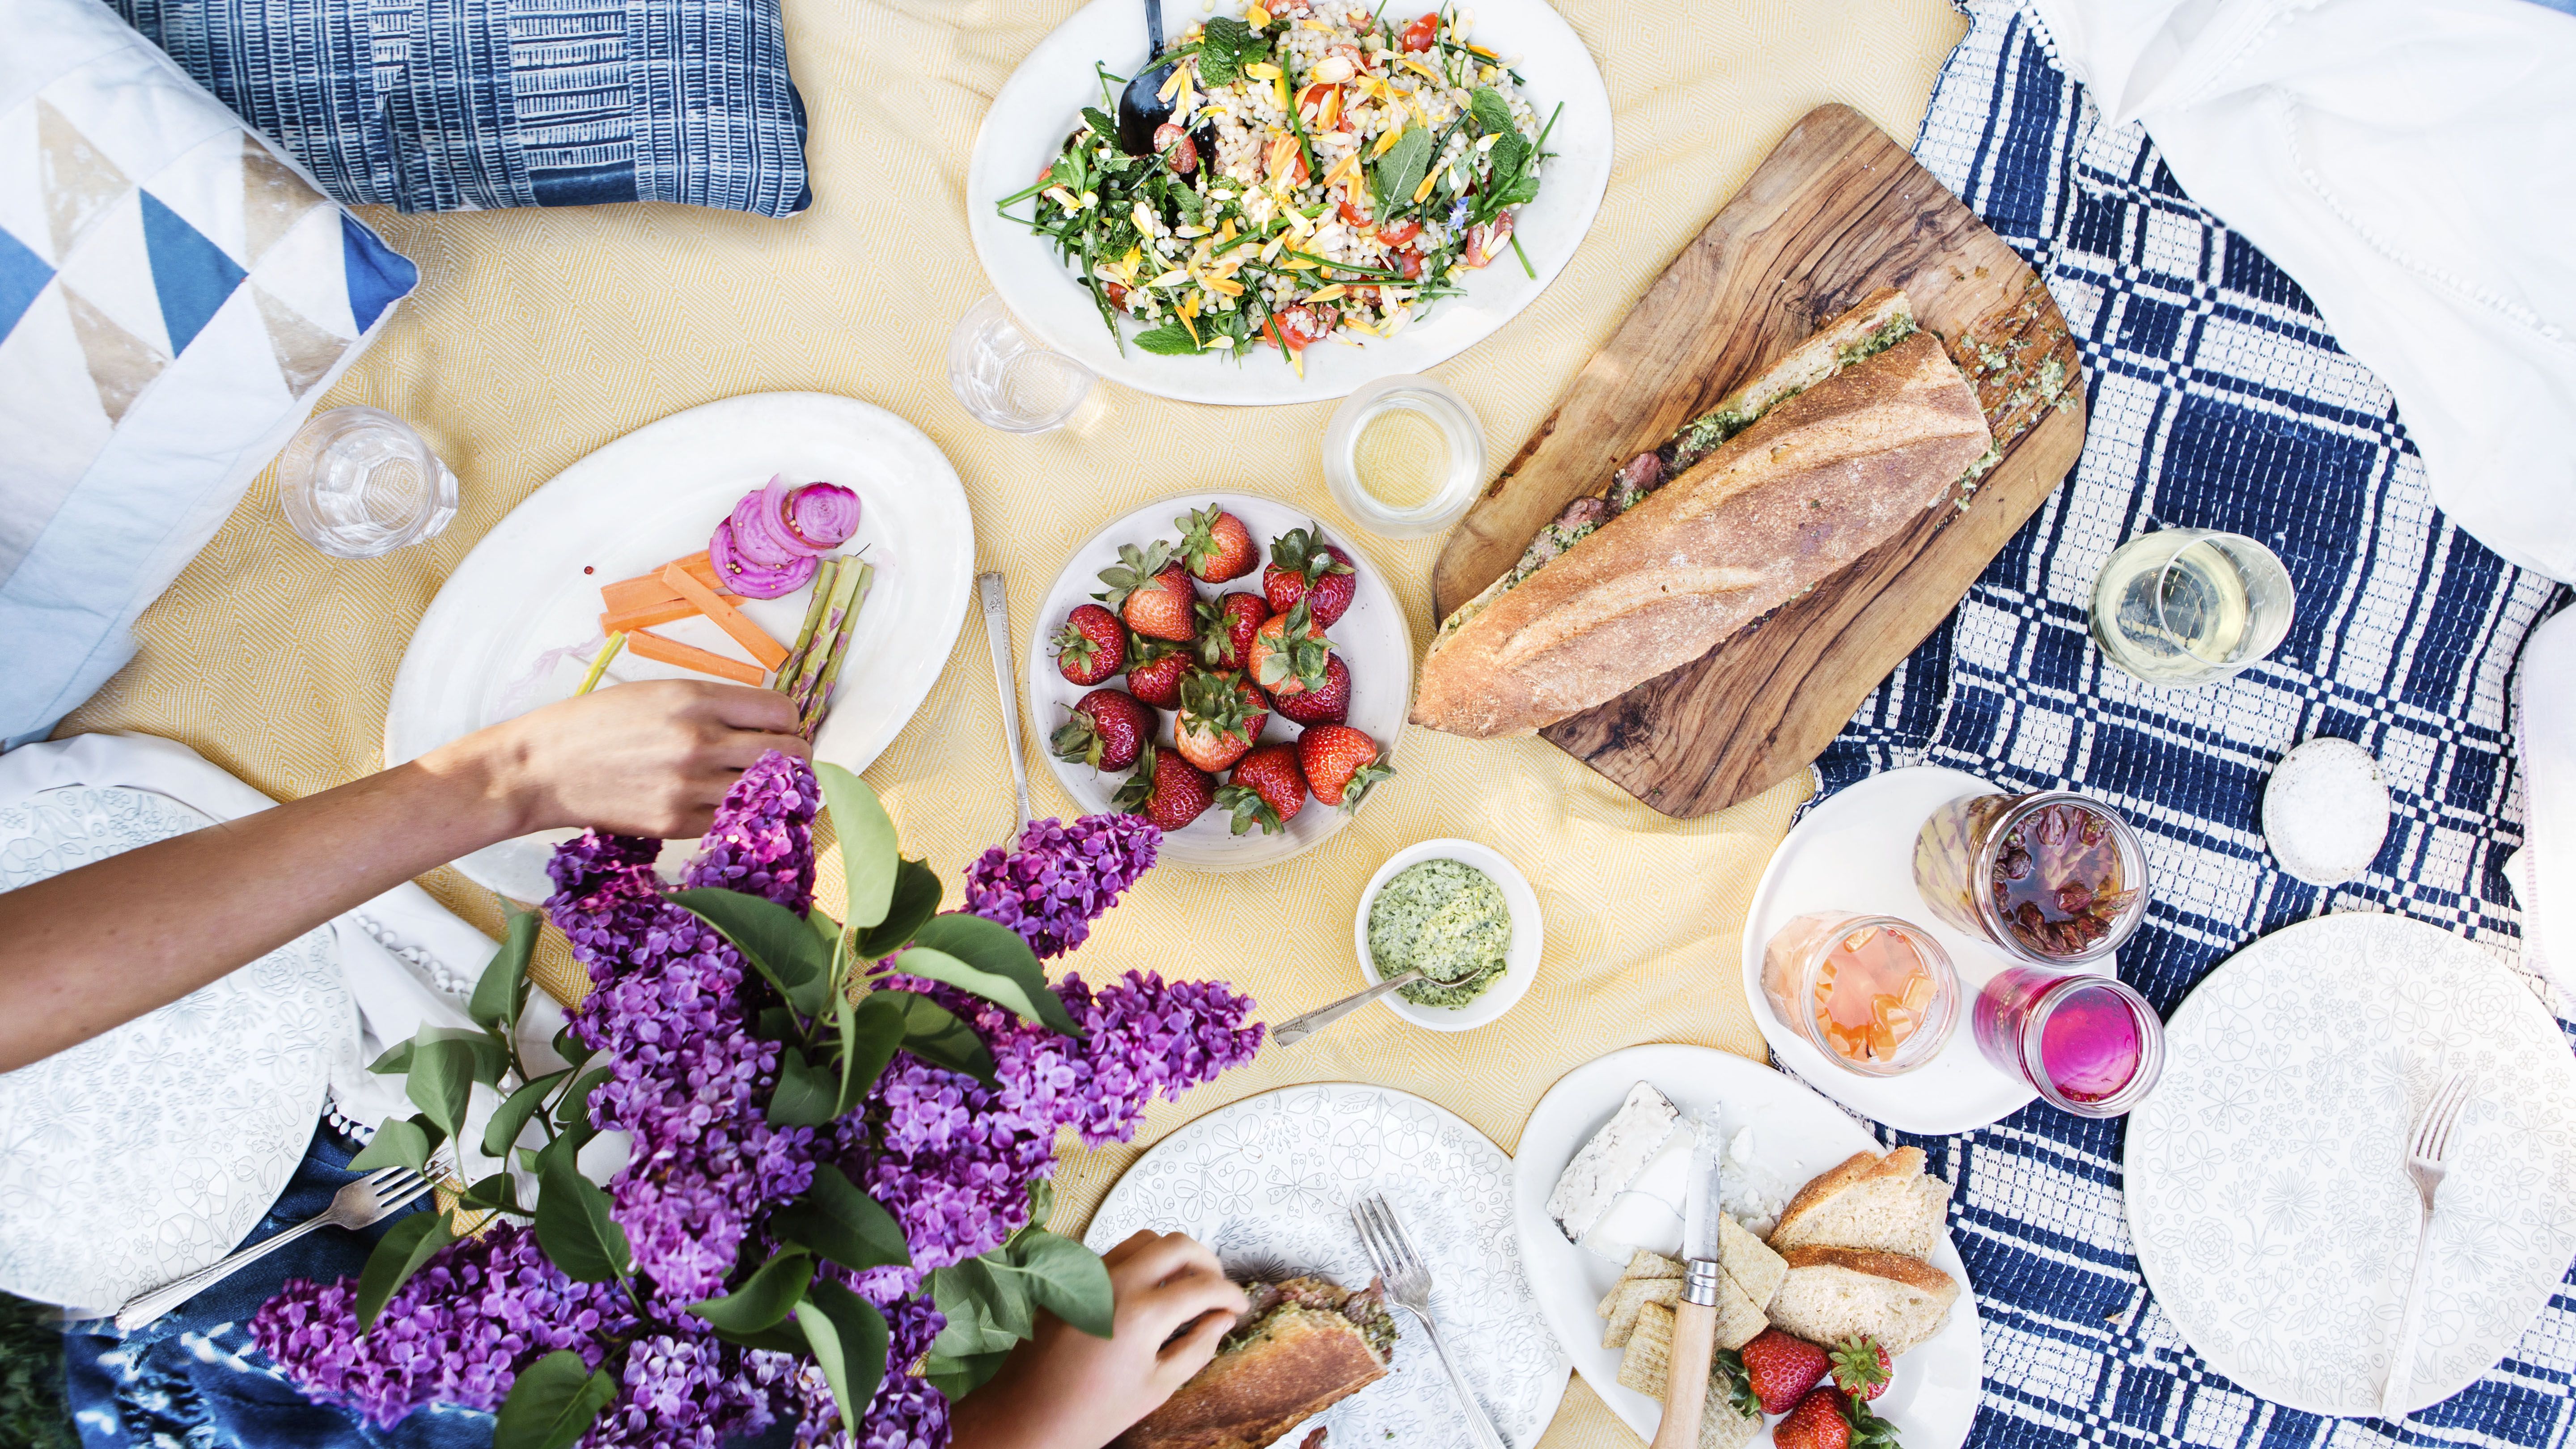 51 Easy Picnic Food Ideas - Recipes by Love and Lemons